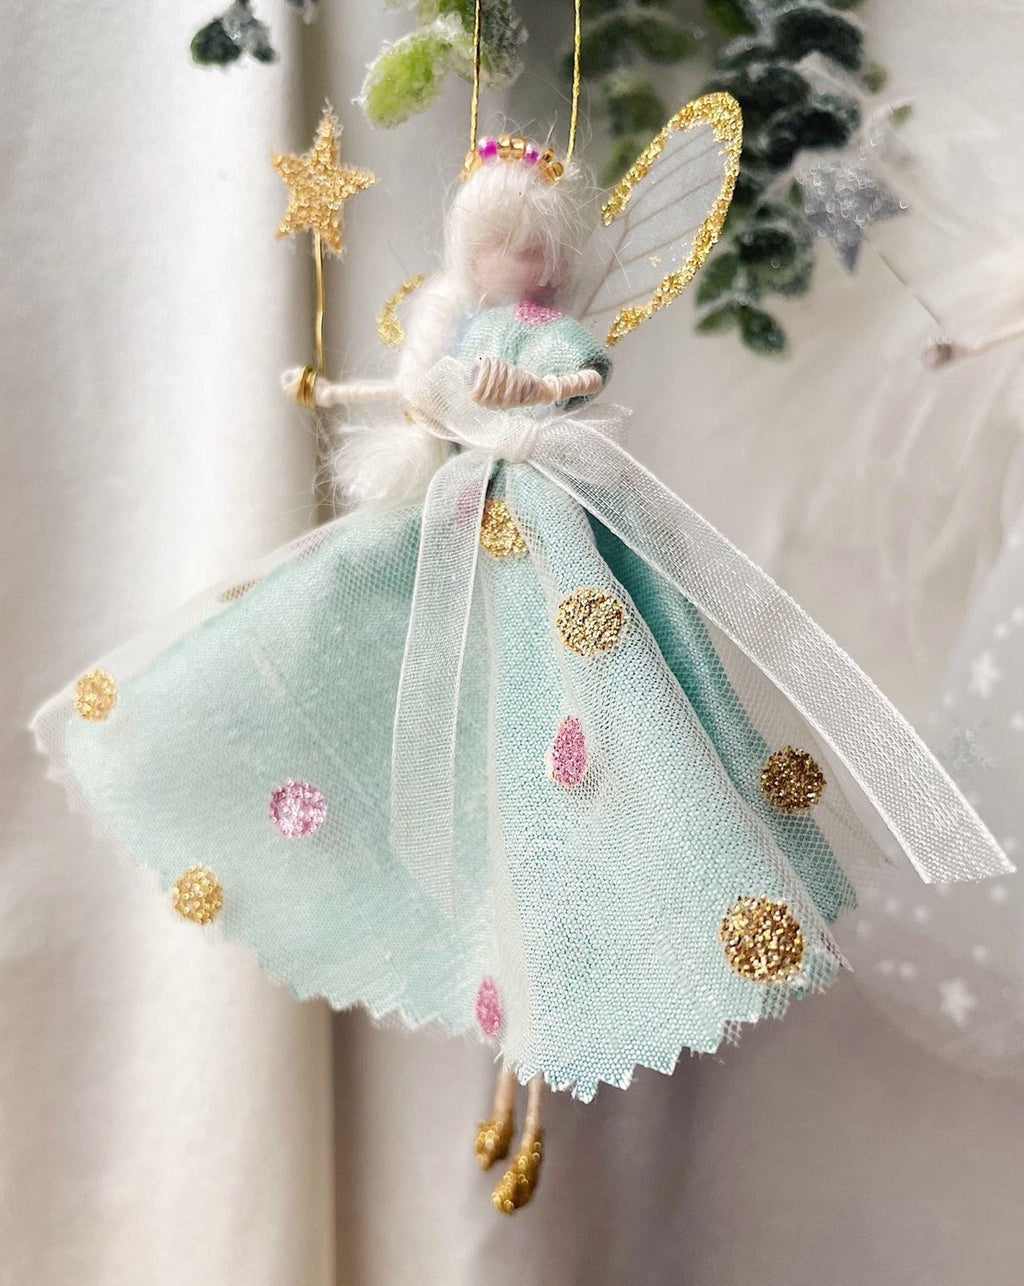 This little Fairy is dressed in a jade green Silk Dupion with an overlay of spotted tulle. She has sashed her gown at the waist with an Organza ribbon tied into a bow. Her little shoes are dipped in glitter. A beaded tiara sits upon her head, and of course, her glittered wand to grant you your wishes!